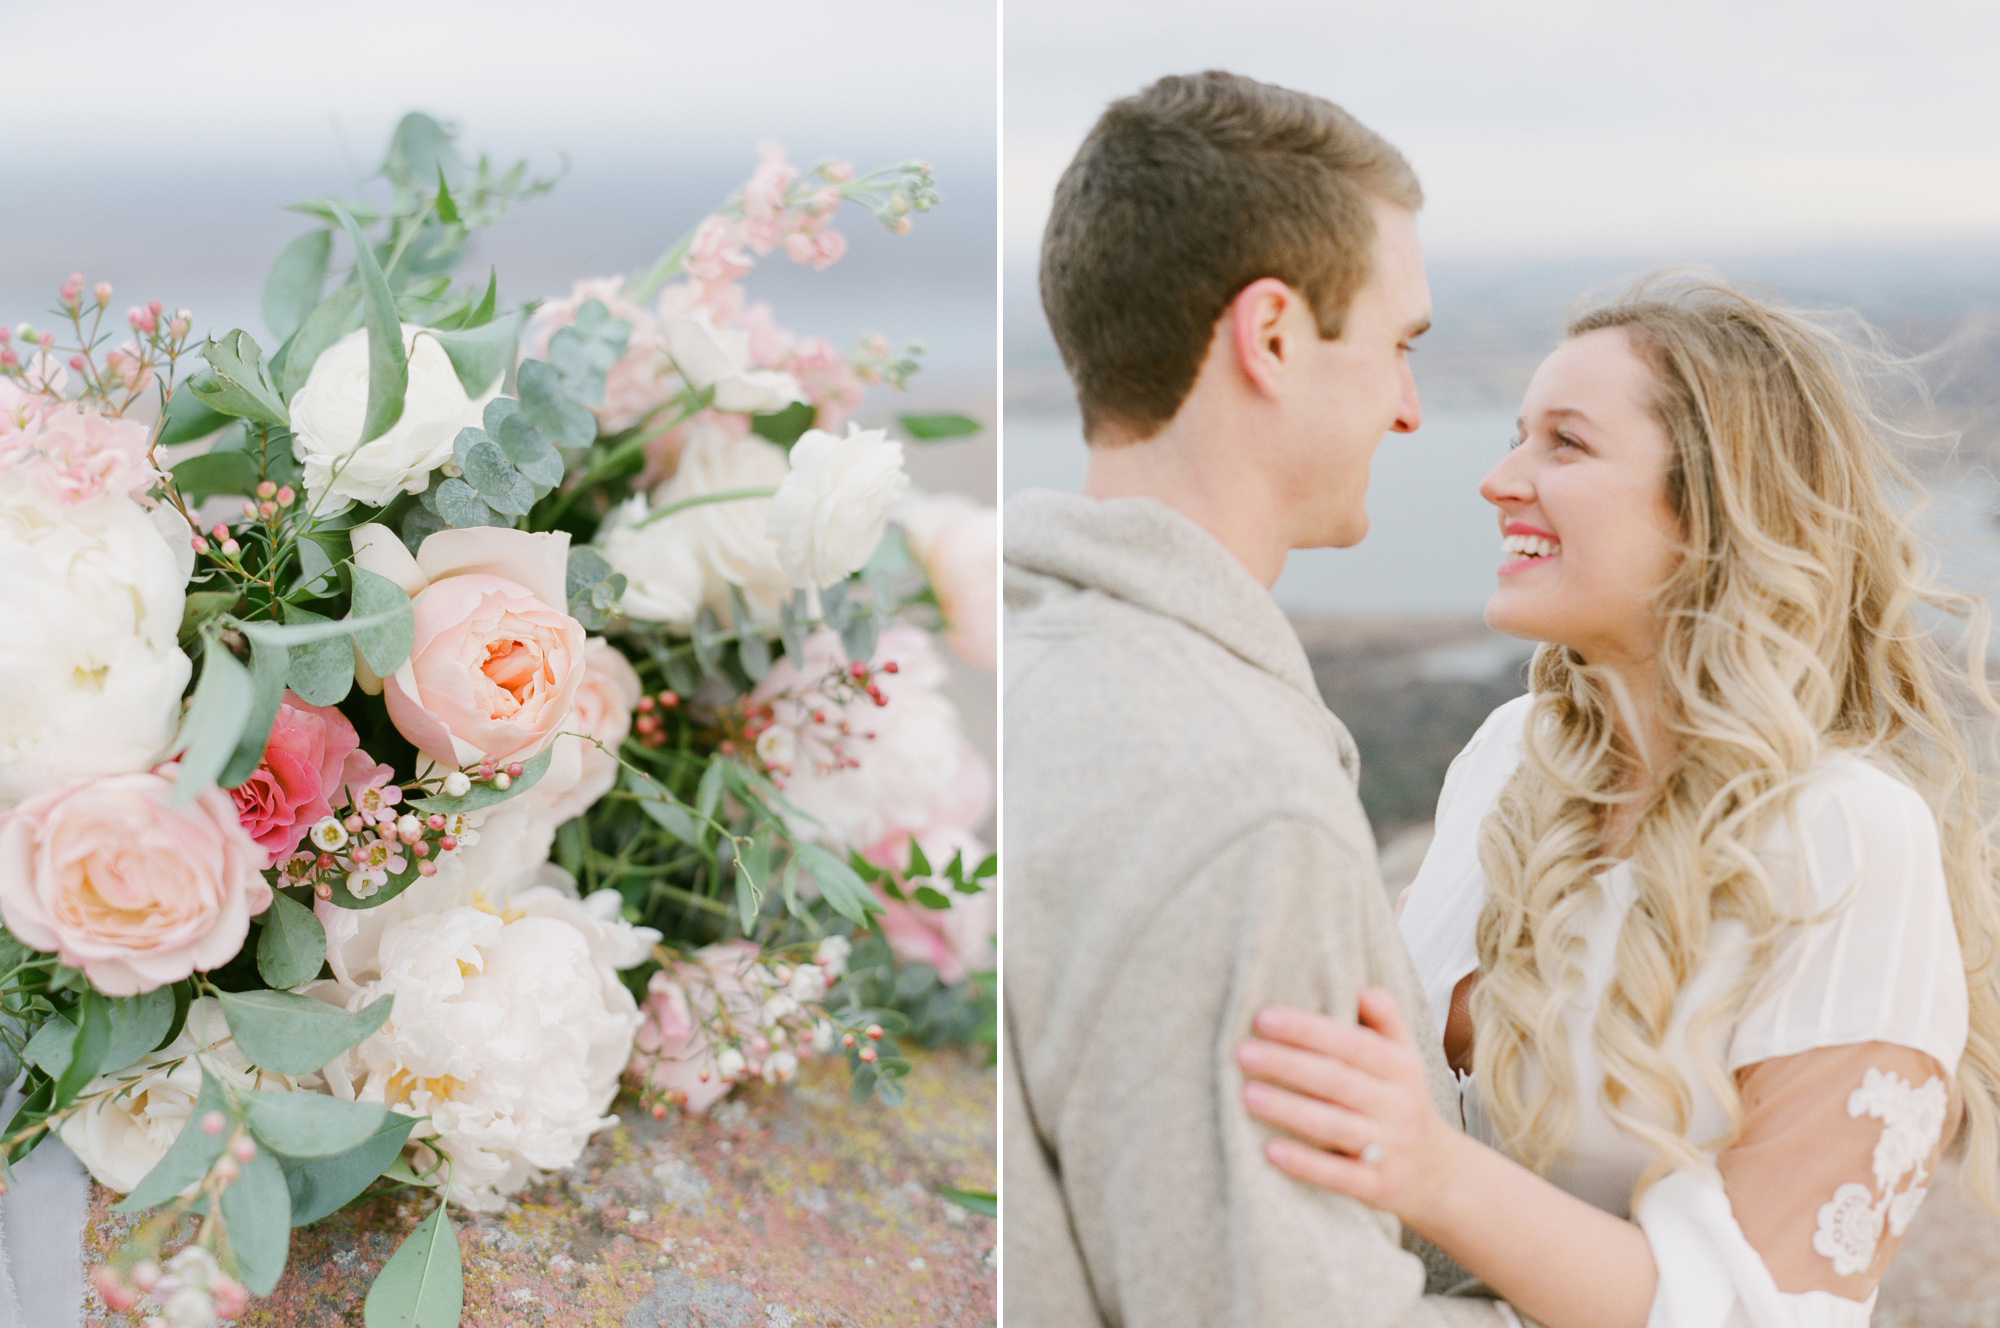 A film engagement session by White Sparrow wedding photographer Tenth & Grace